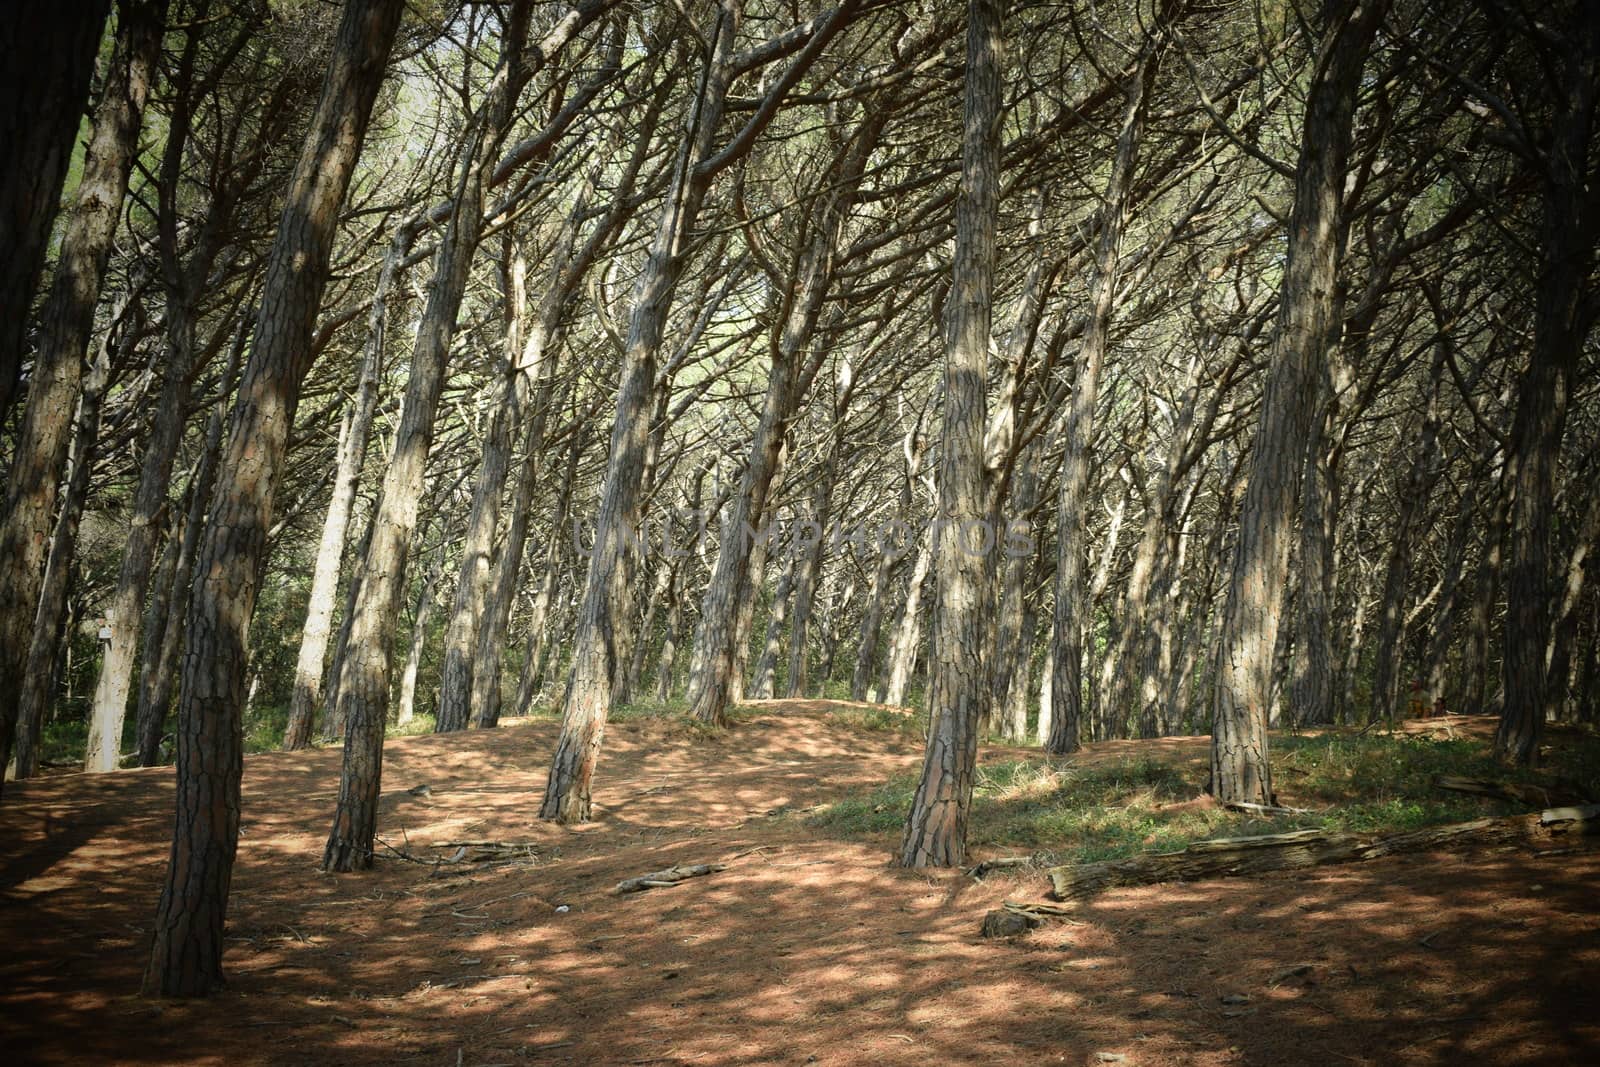 Pine trees and pinewood forest on the seaside, Beach and sea of Marina di Cecina, Maremma, Tuscany, Italy, Europe